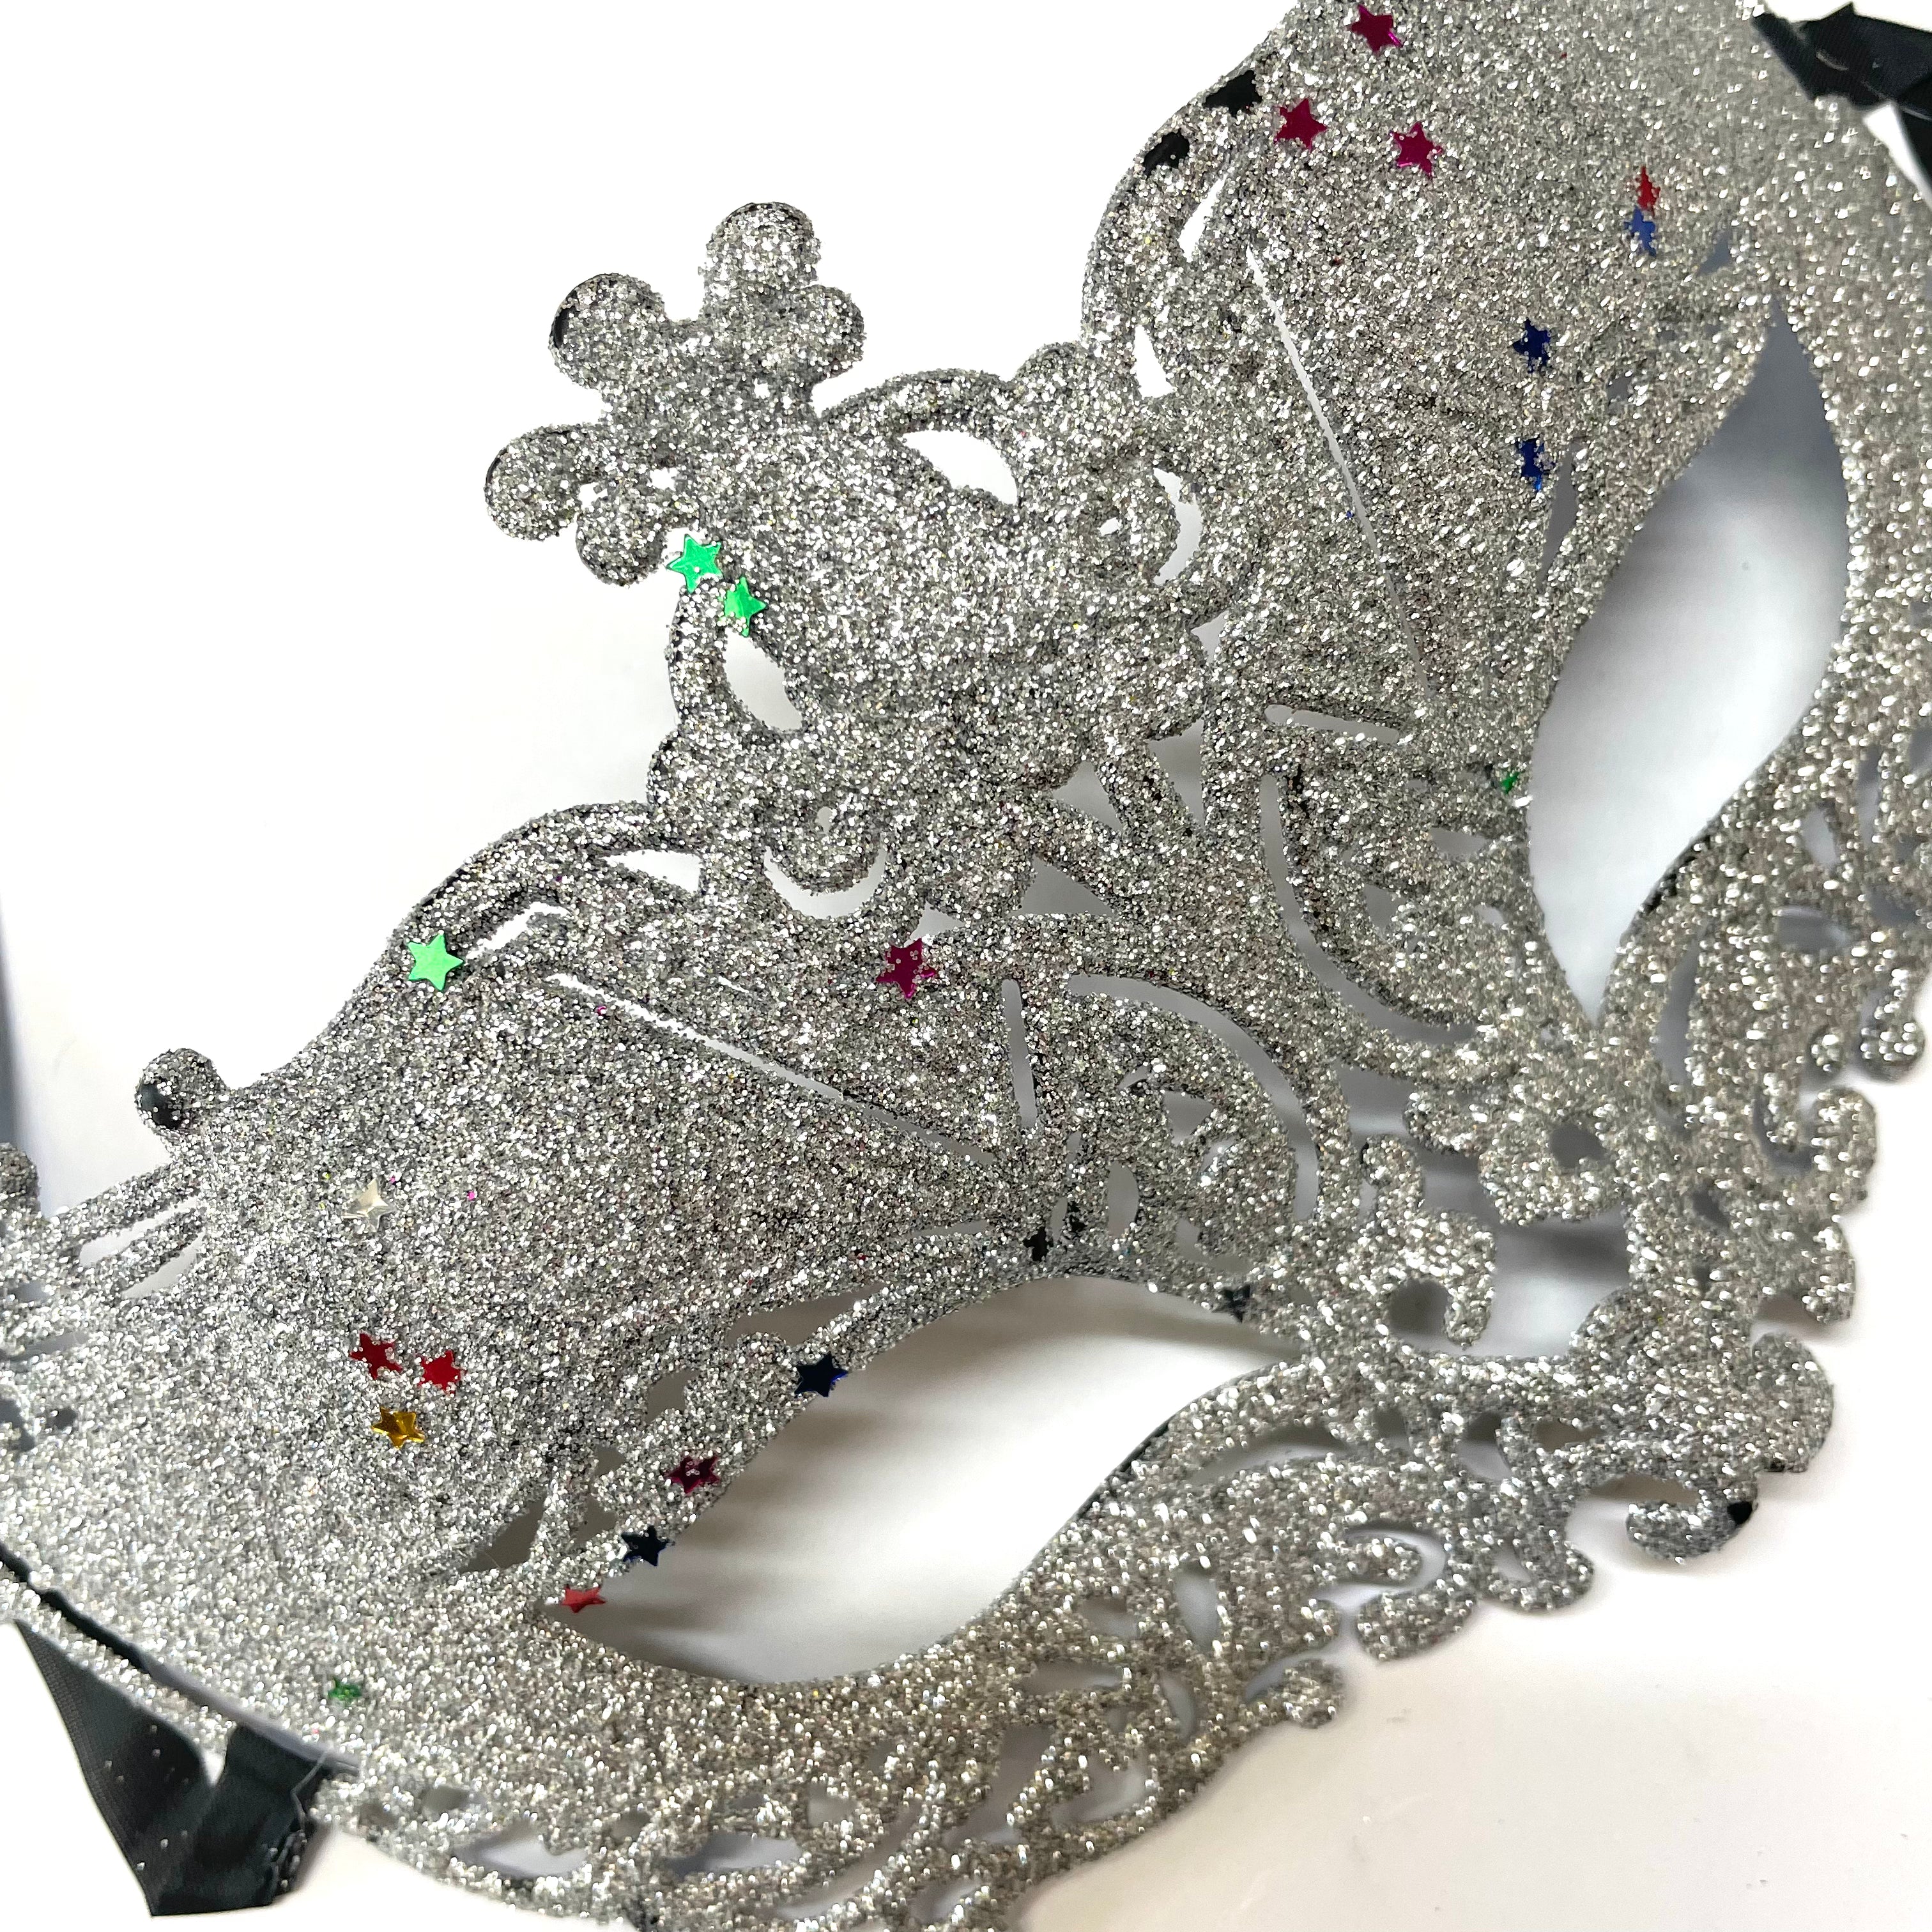 Women Lace Sexy Elegant Masquerade Ball Party Mask - Silver ((Style 5))